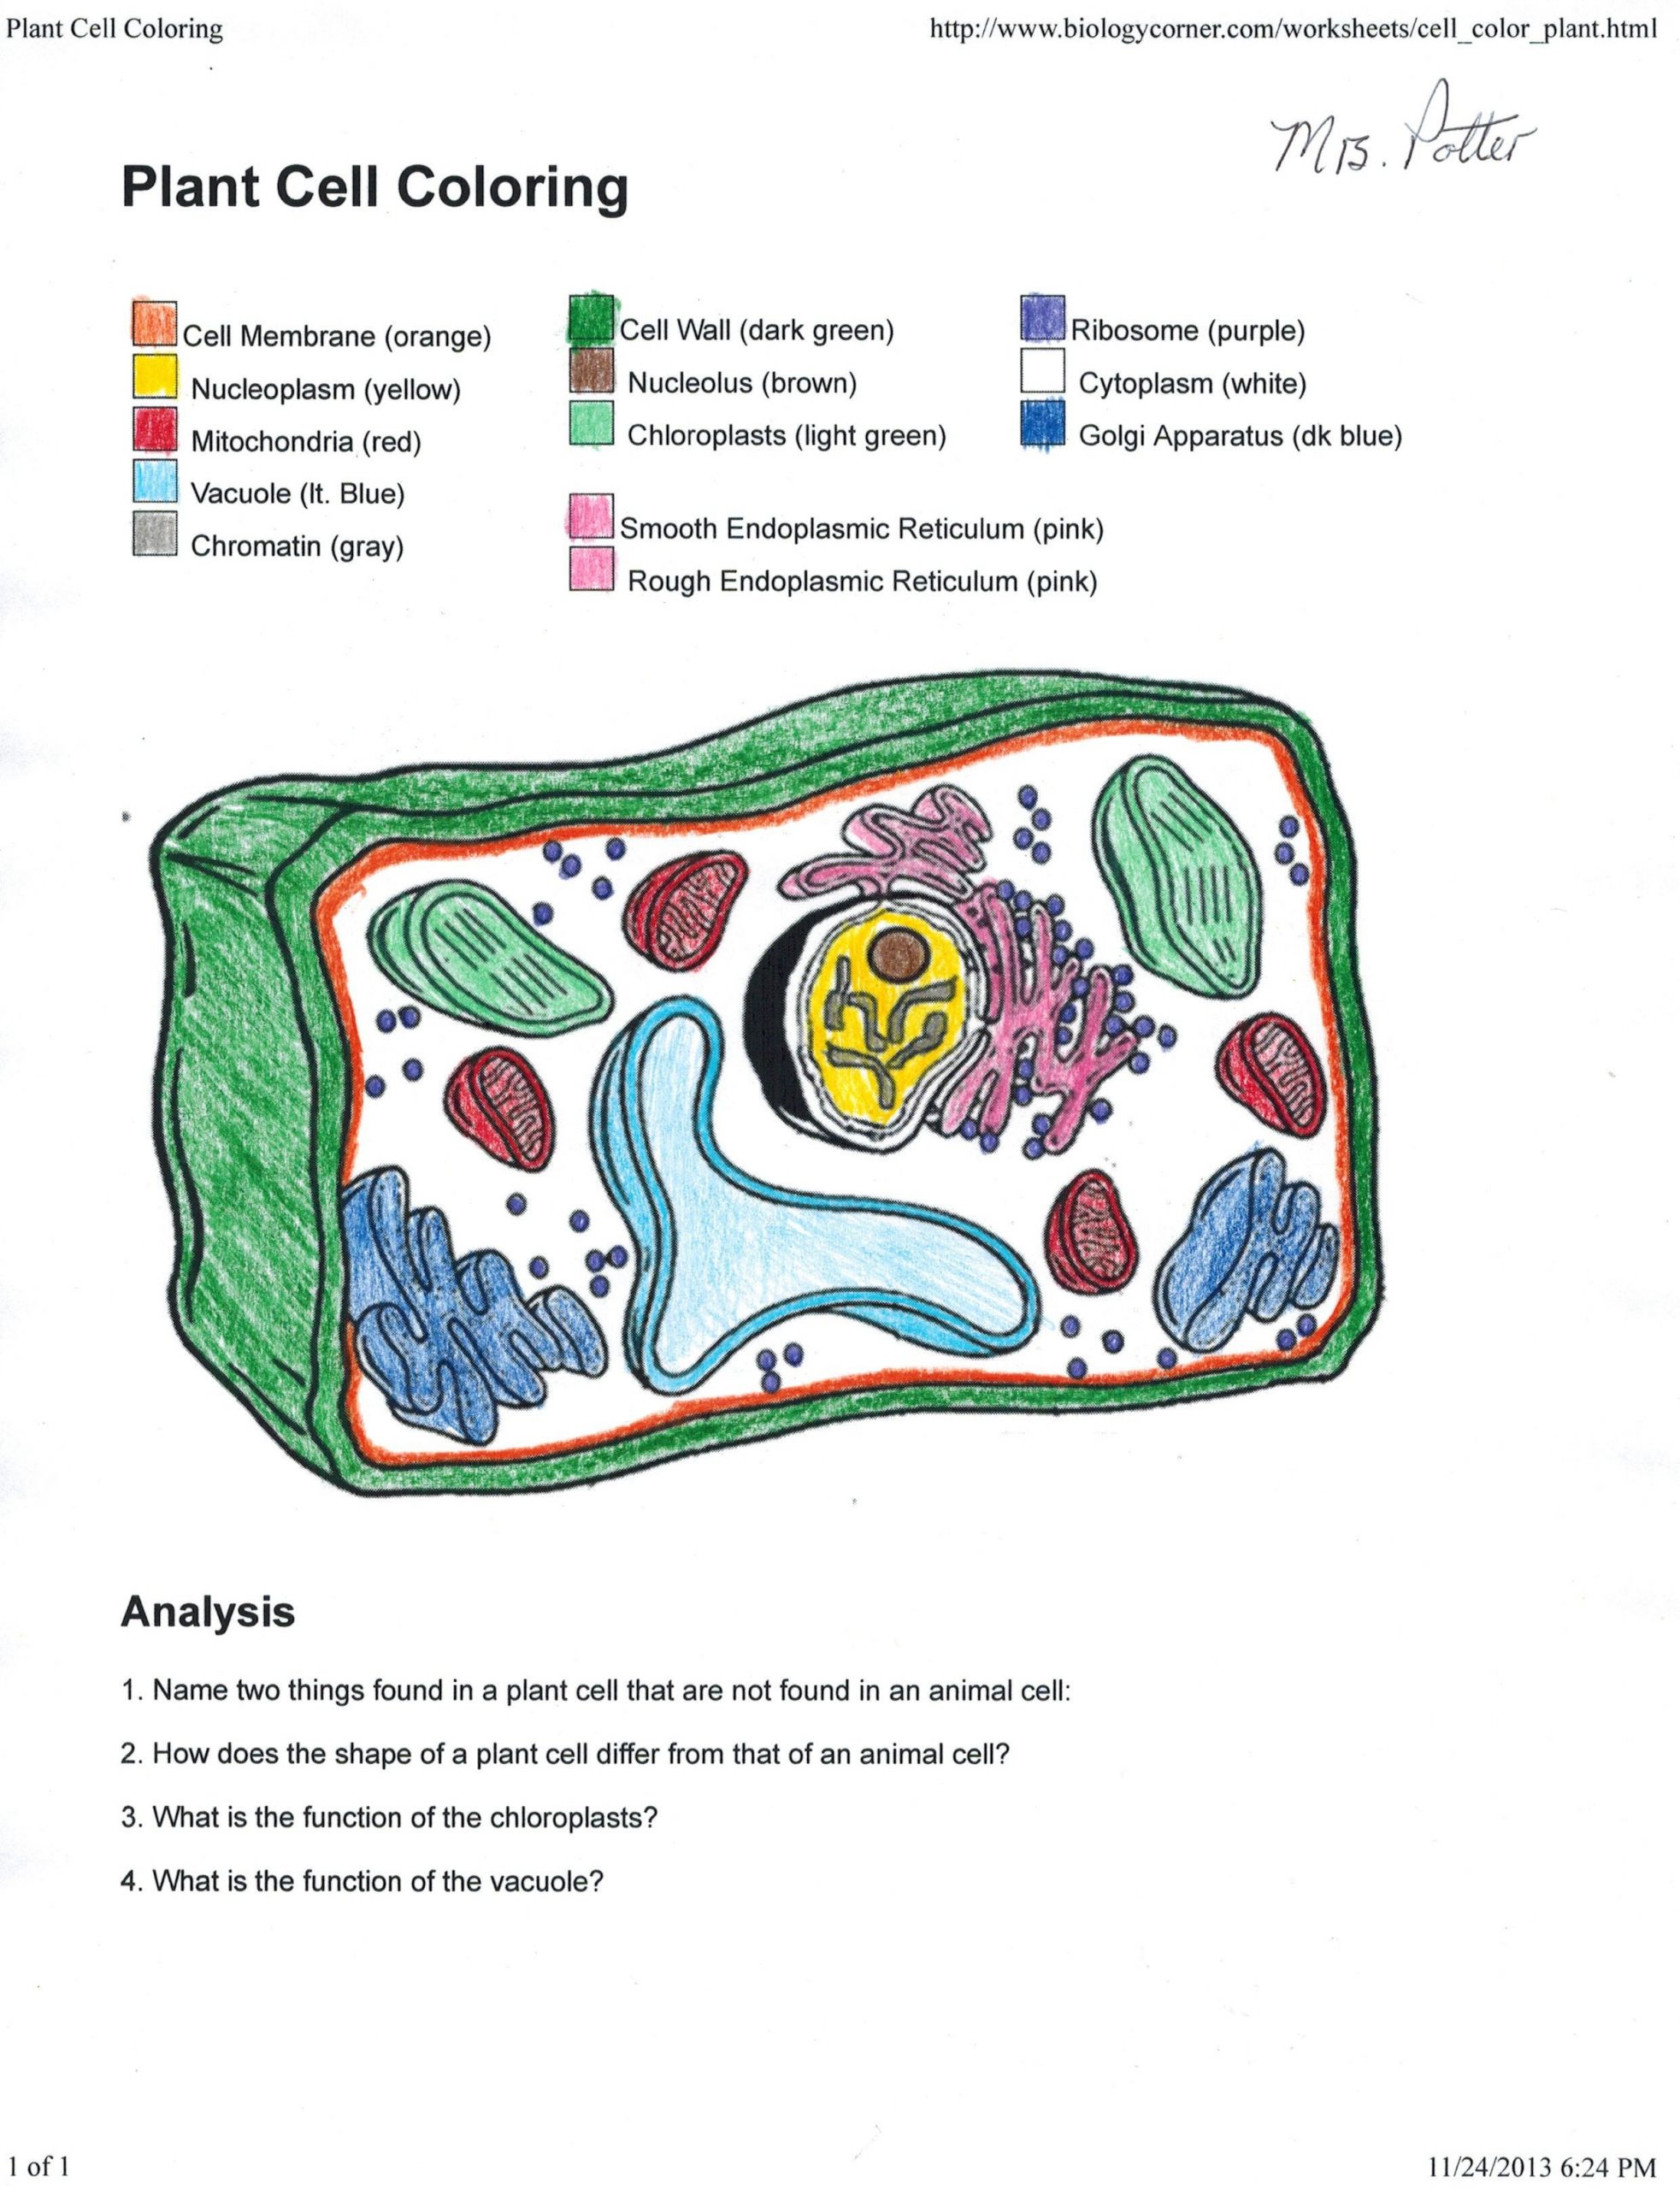 Animal Cell Coloring Worksheet Trends for Plant Cell Coloring Answer Sheet